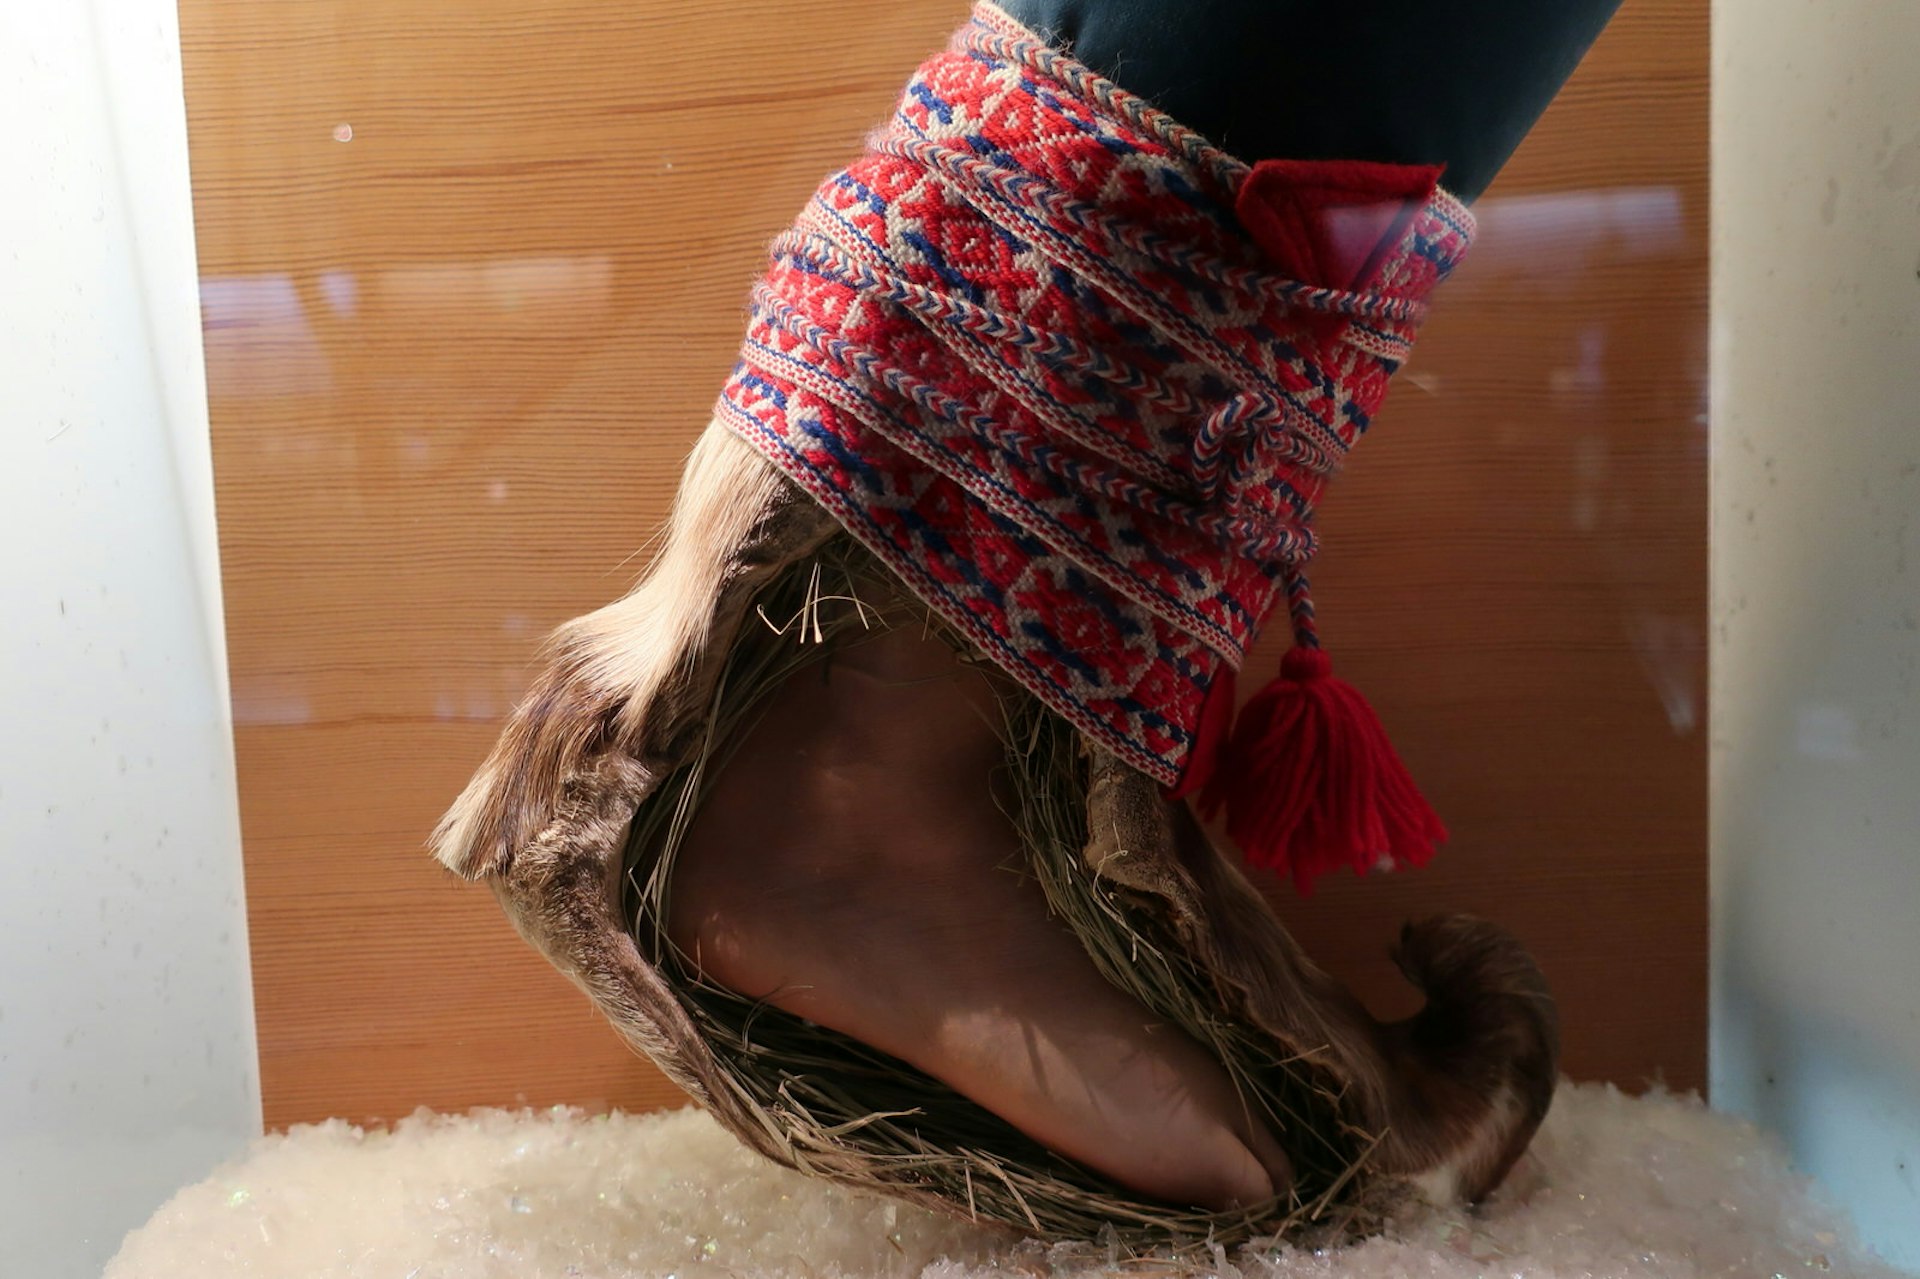 A cross-section of a traditional Sami boot on diplay at the Sami Museum in Inari. It's made of reindeer hide and tied to the leg with red and blue embroidered braiding.